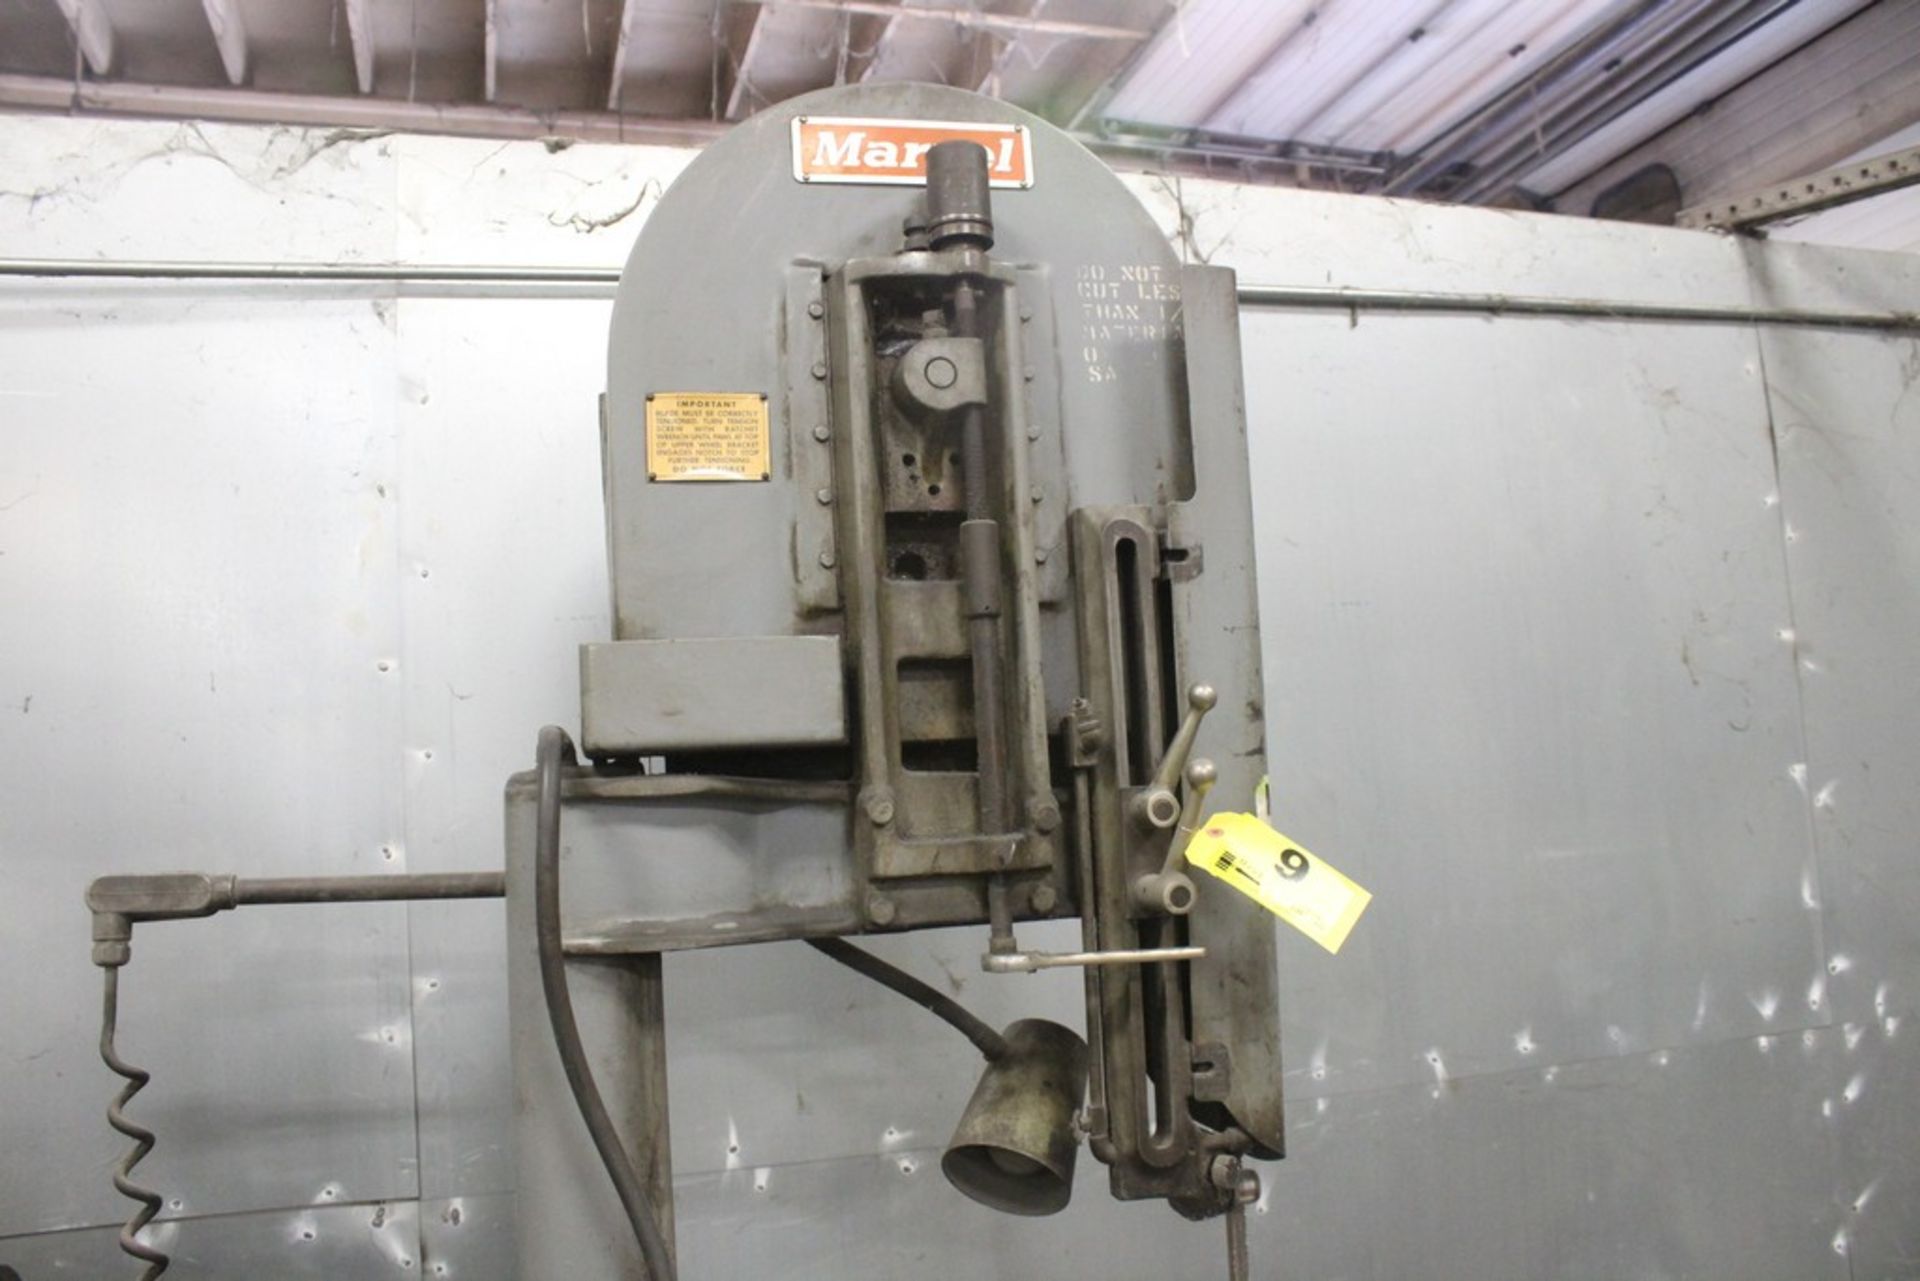 MARVEL NO. 8 UNIVERSAL VERTICAL BAND SAW, S/N 810599 Loading Fee: $250 - Image 2 of 7